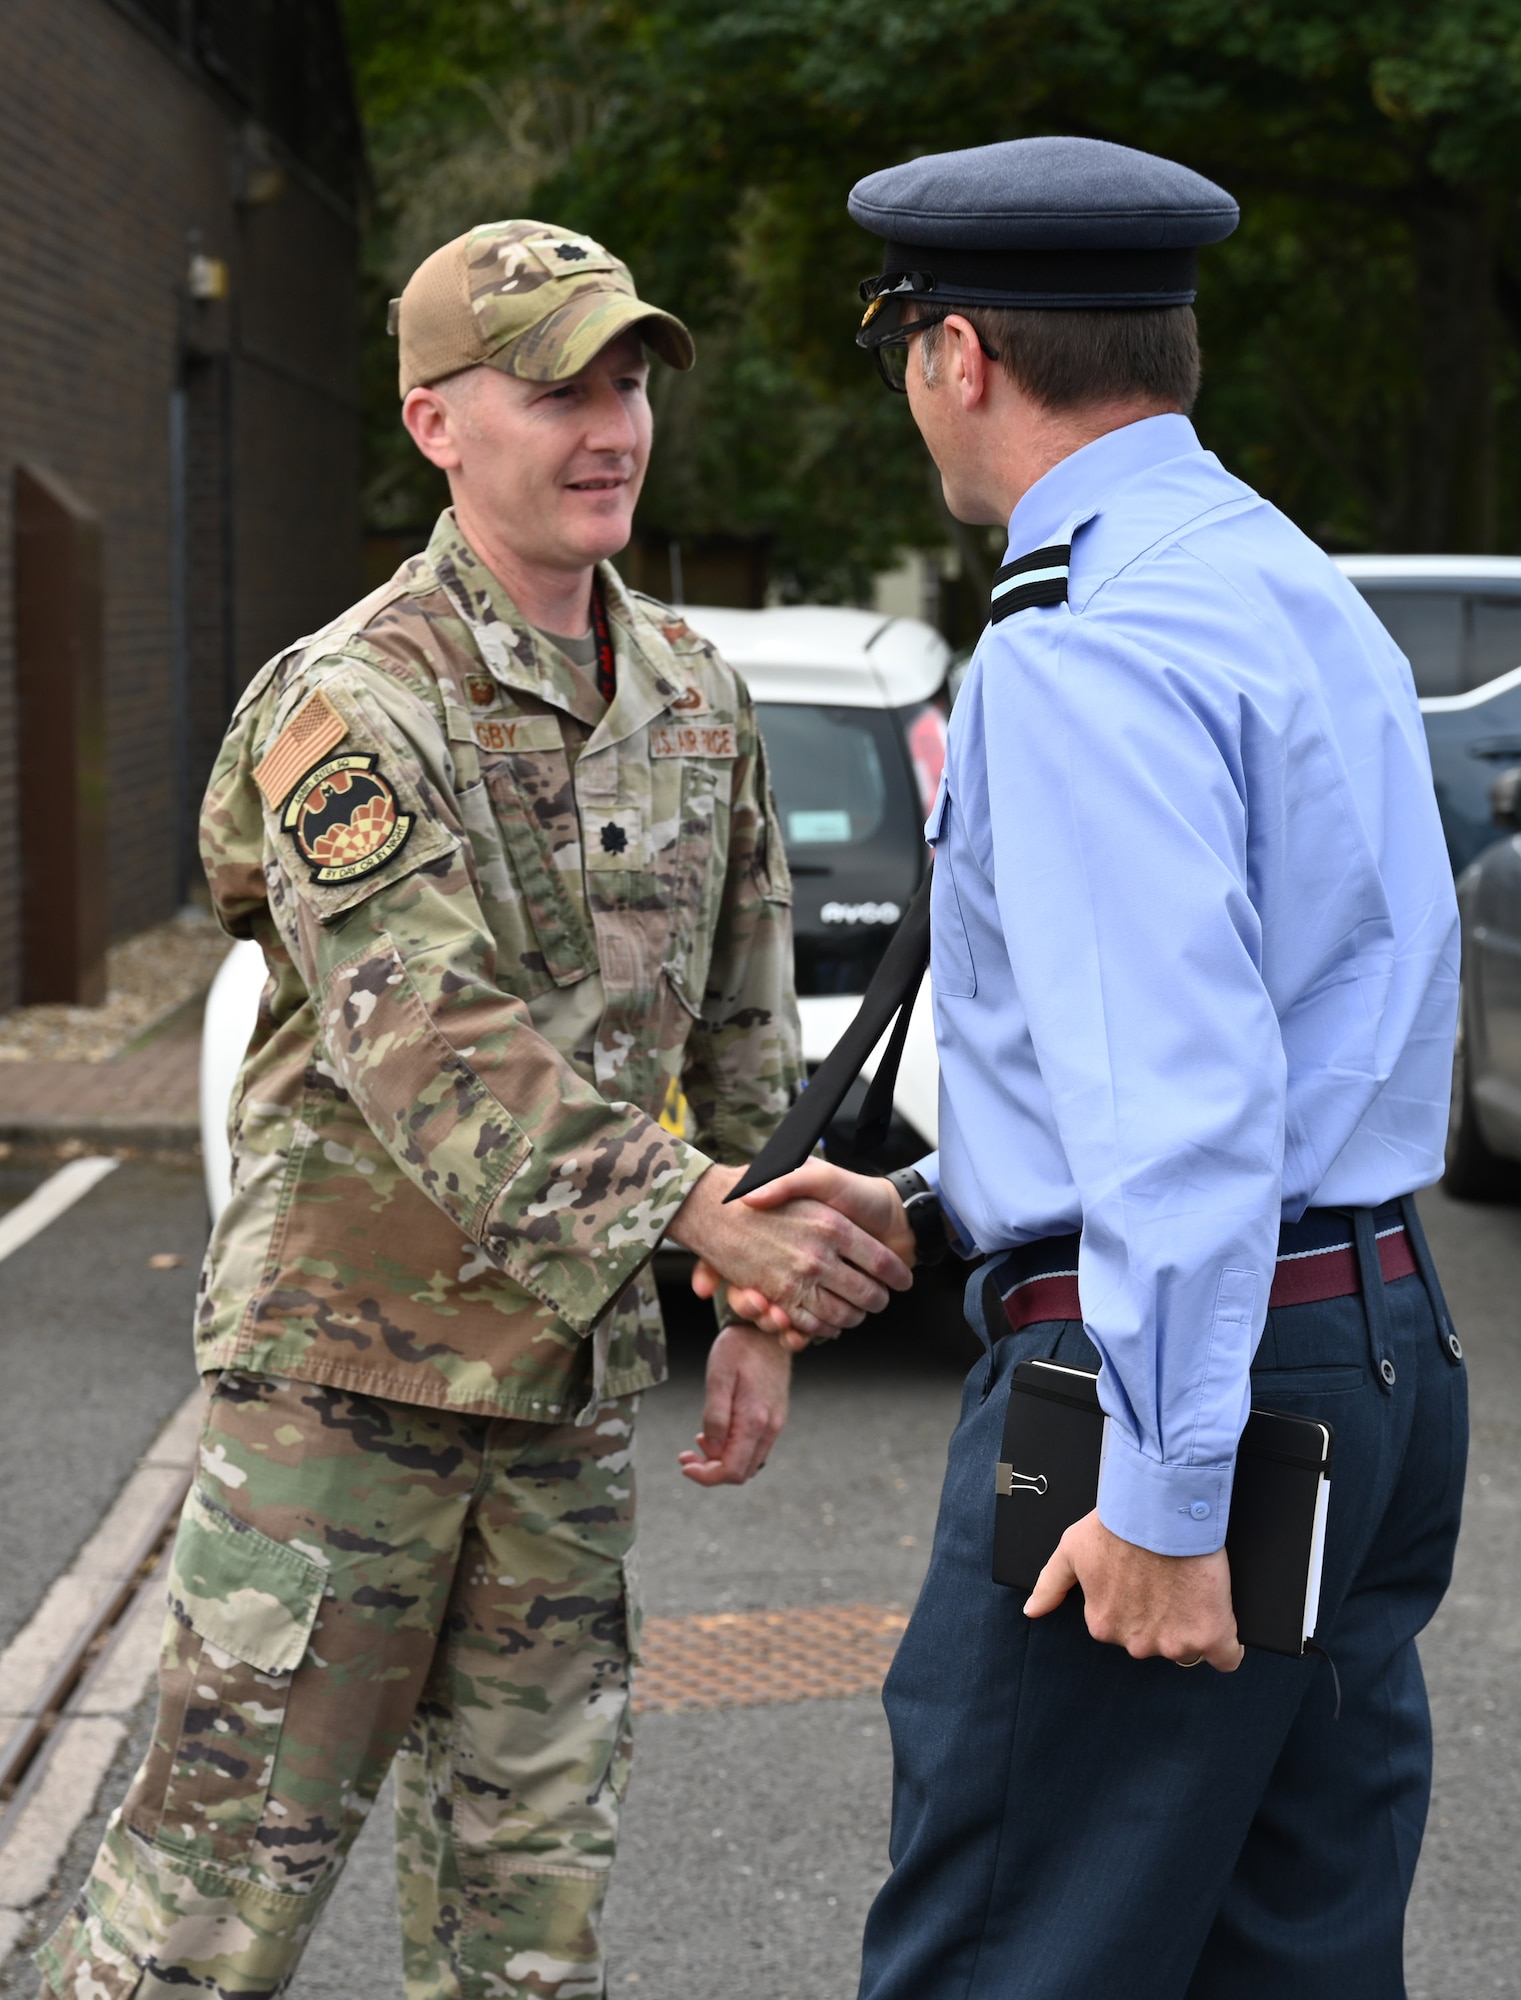 Air Commodore Simon Strasdin, right, Royal Air Force Intelligence, Surveillance, Target Acquisition and Reconnaissance force commander, based at RAF Waddington, is greeted by Lt. Col. Bradley Higby, 488th Intelligence Squadron commander, during a visit to RAF Mildenhall, England, Aug. 23, 2023. Strasdin was here to strengthen United Kingdom-US relationships and thank 100th ARW, 95th Reconnaissance Squadron and 488th IS Airmen for their hard work and cooperation in the joint partnership program between the RAF and U.S. Air Force reconnaissance aircraft. (U.S. Air Force photo by Karen Abeyasekere)